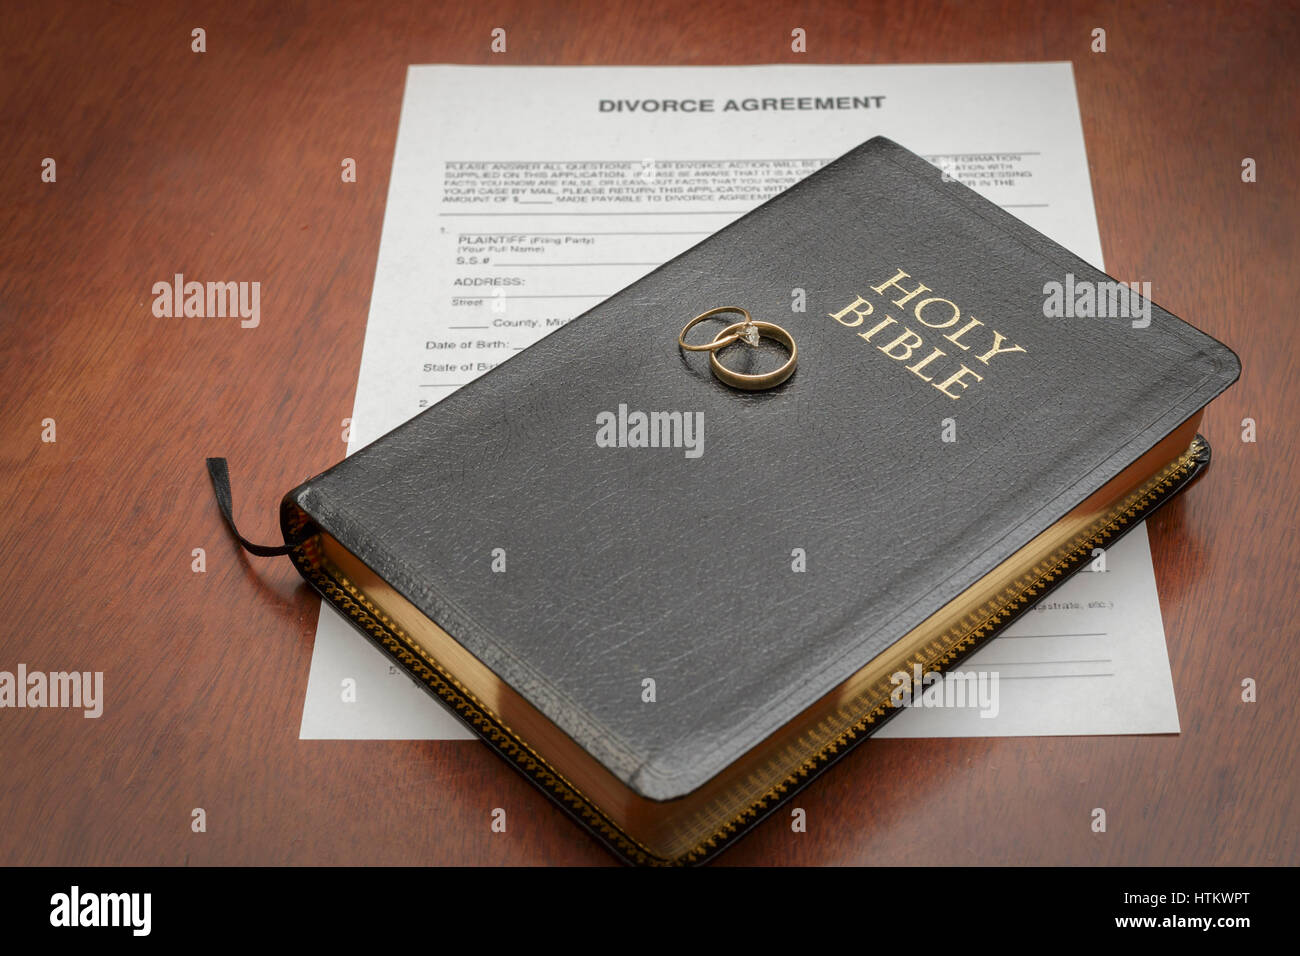 wedding rings and bible with divorce papers Stock Photo